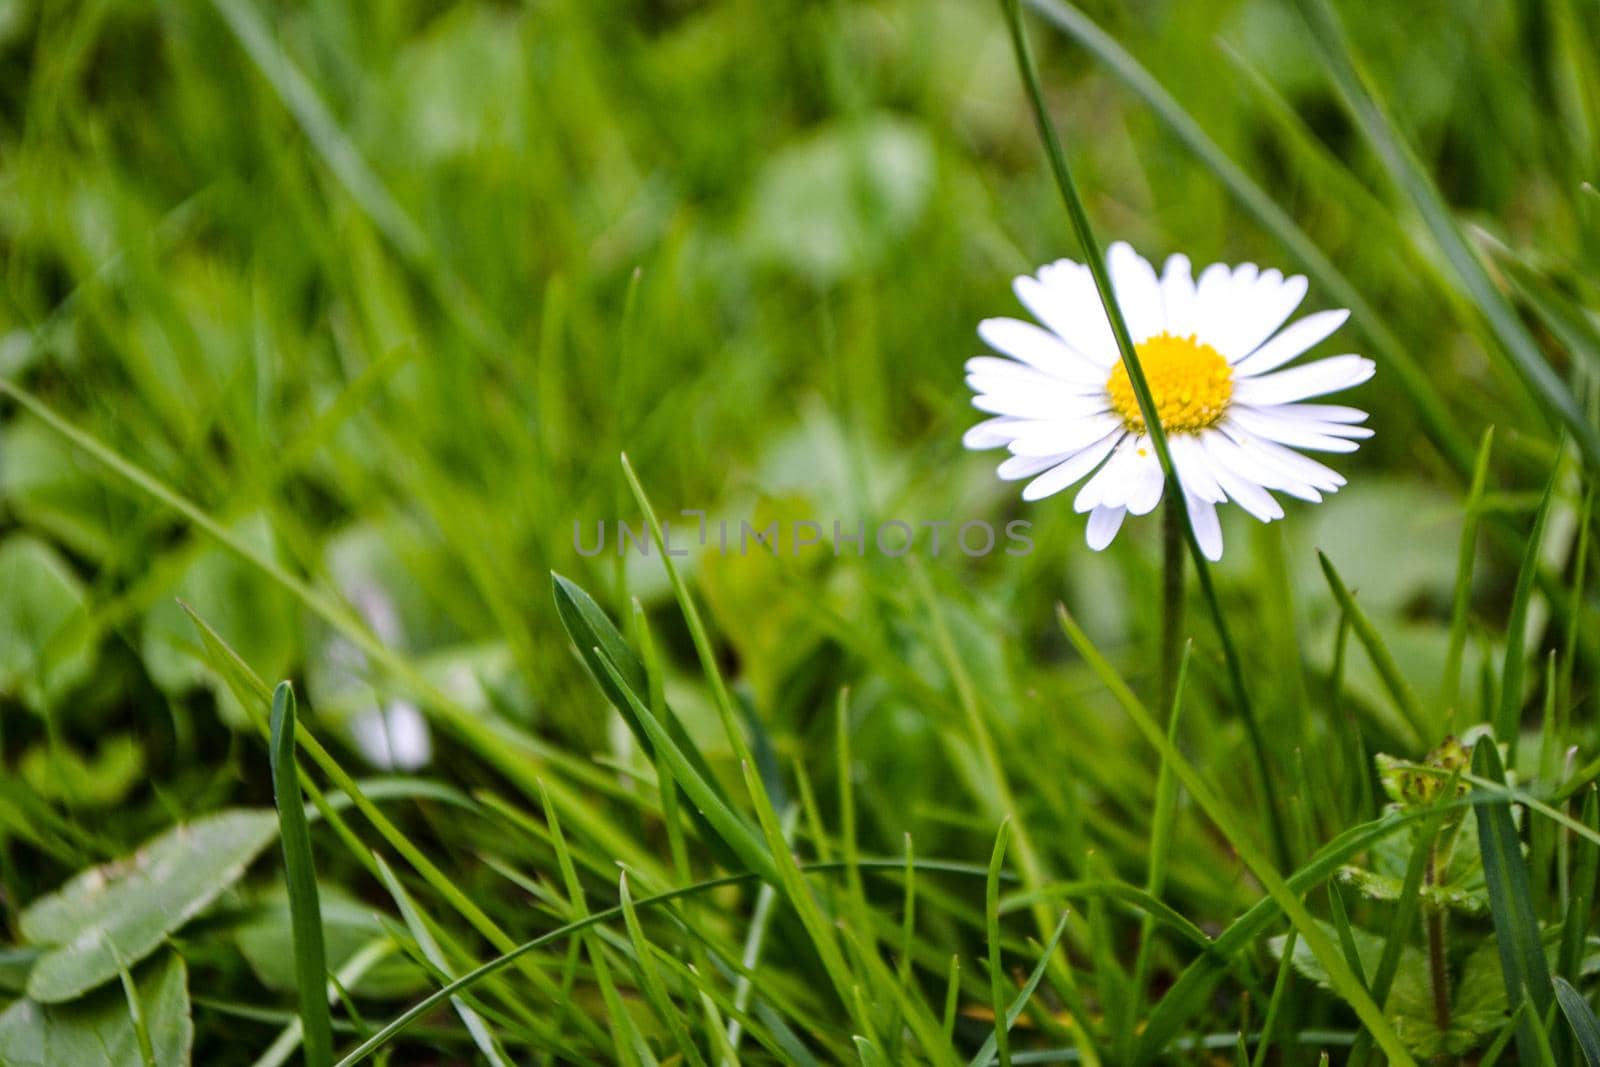 Chamomile flower among green grass and leaves, natural background. daisies among the green grass. High quality photo